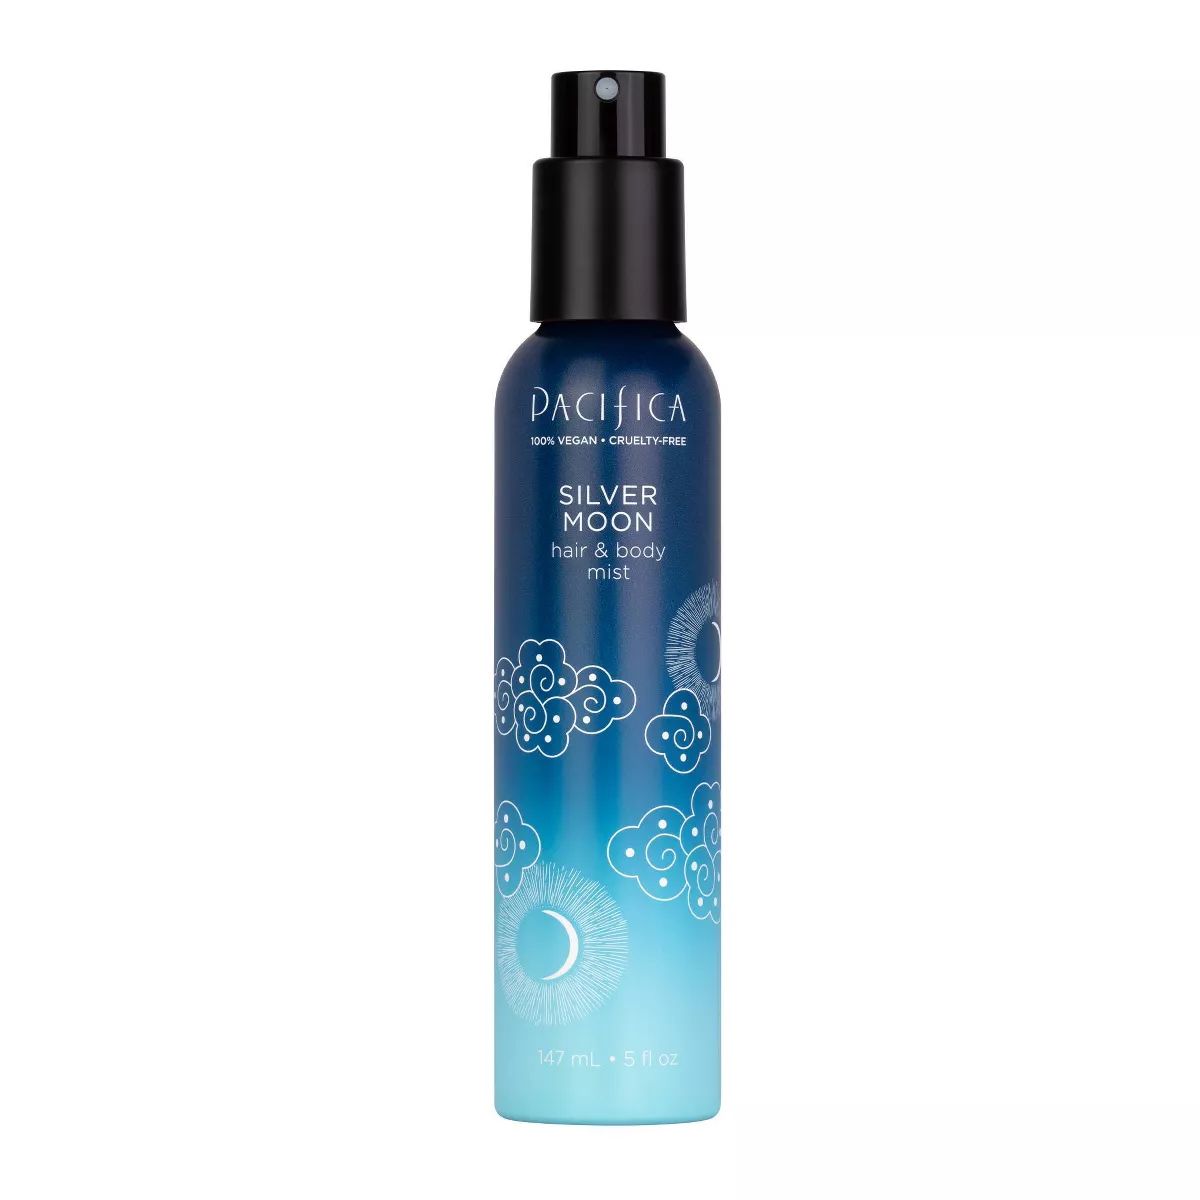 Pacifica Silver Moon Hair and Body Mist - 5 fl oz | Target